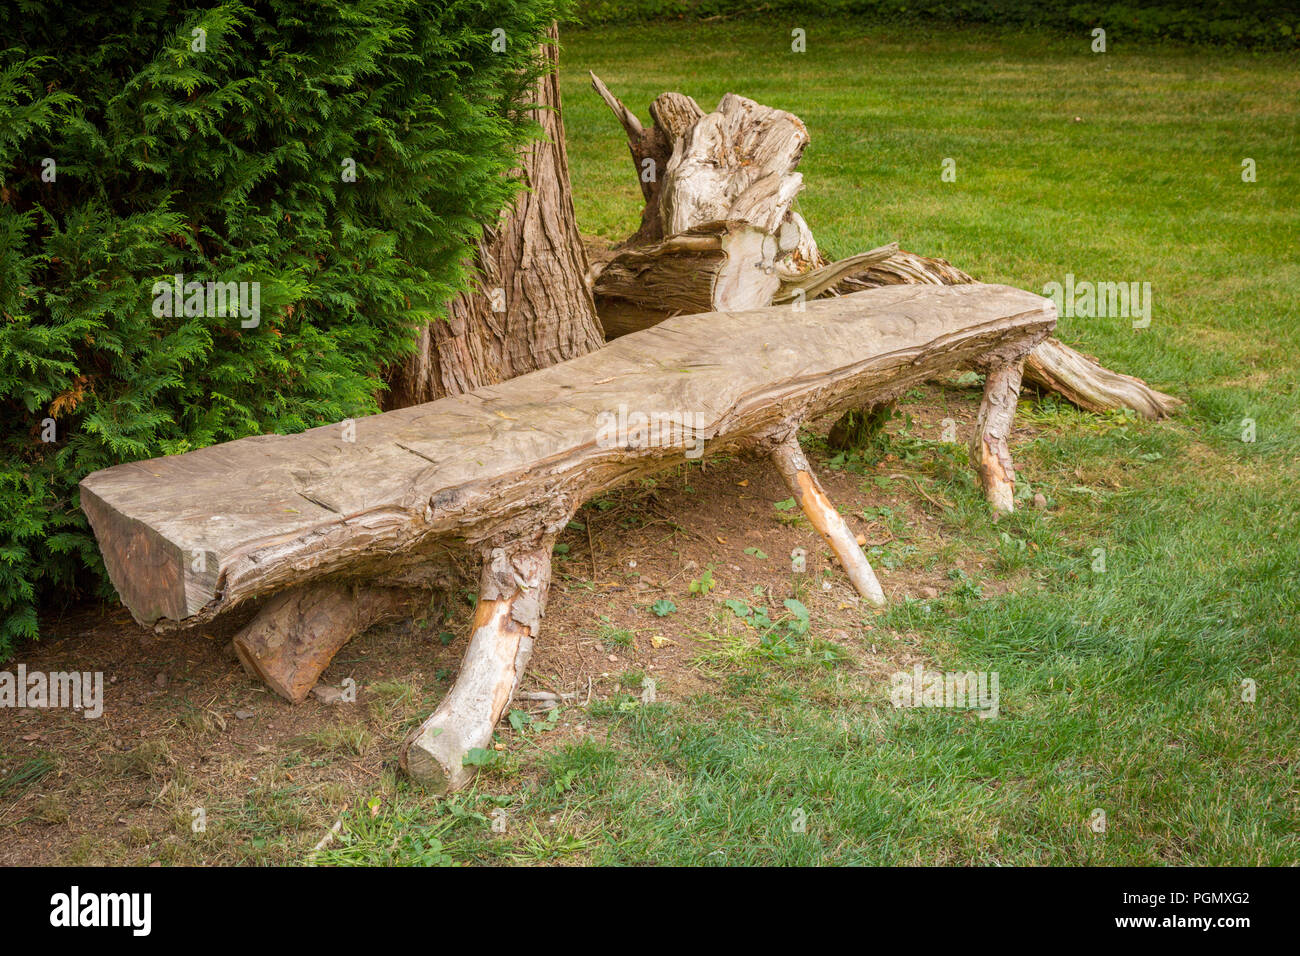 Rustic Bench Made From Tree Trunk In A Lawned Garden Uk Stock Photo Alamy